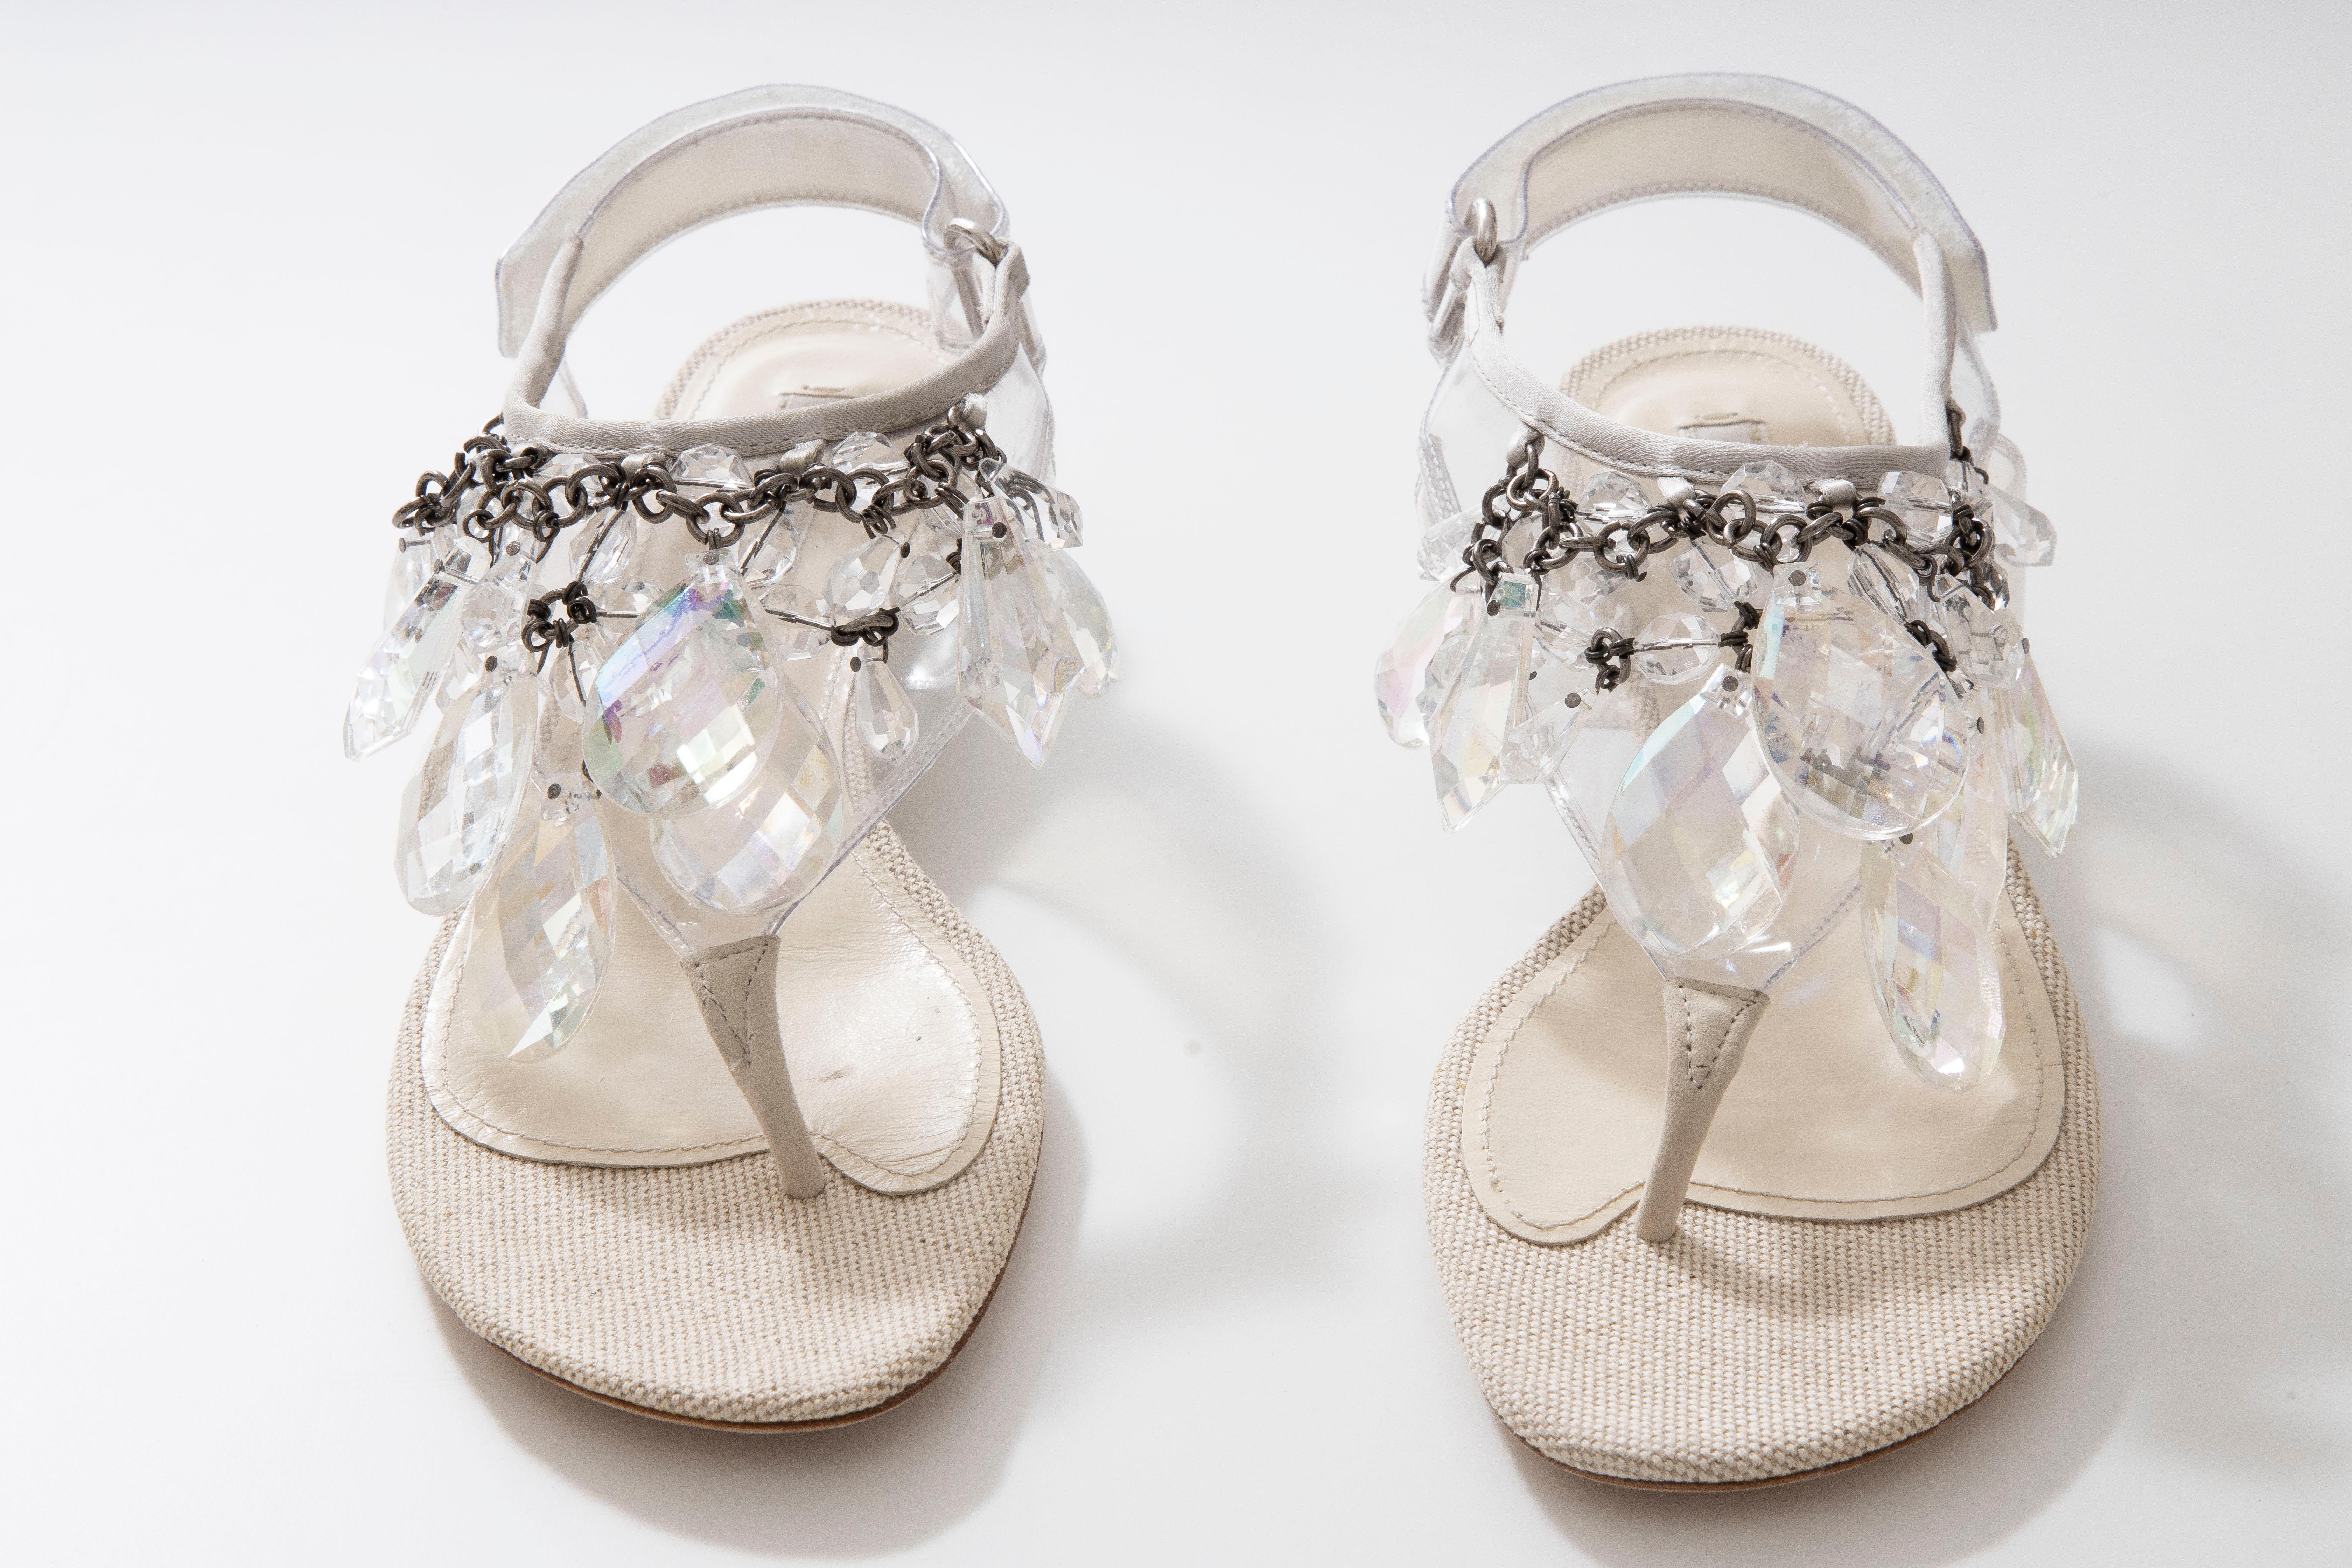 Prada Runway Clear PVC Lucite Faceted Crystal Thong Sandals, Spring 2010 3